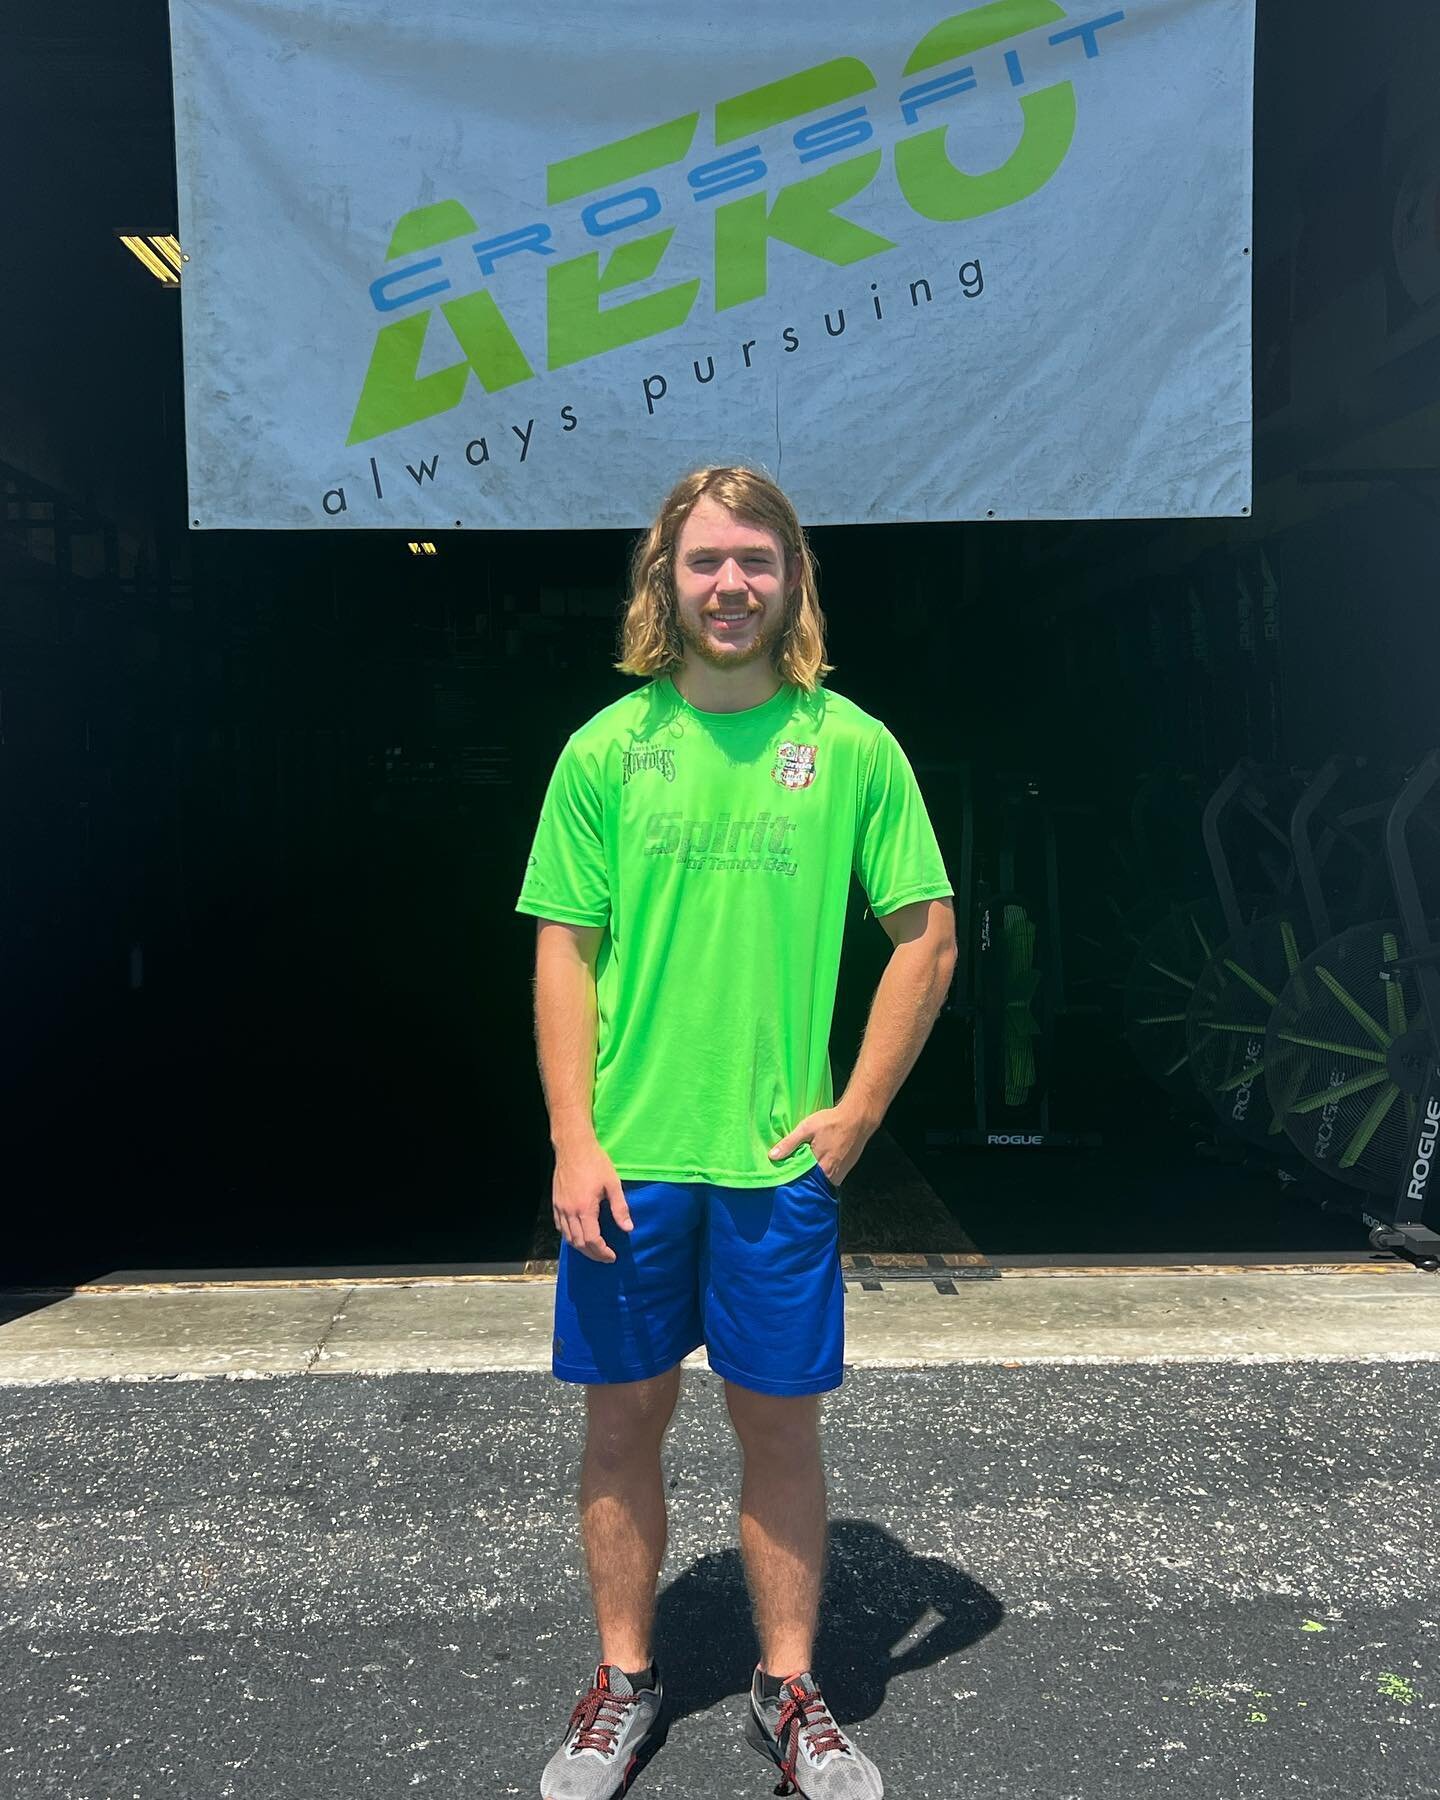 We are ecstatic to announce our Crossfit Aero May Athlete of the Month, Dylan McArdle!! Over the past couple of years, we have seen him accomplish so much and grow immensely as an athlete! All of the competitions he has triumphed, standing on multipl